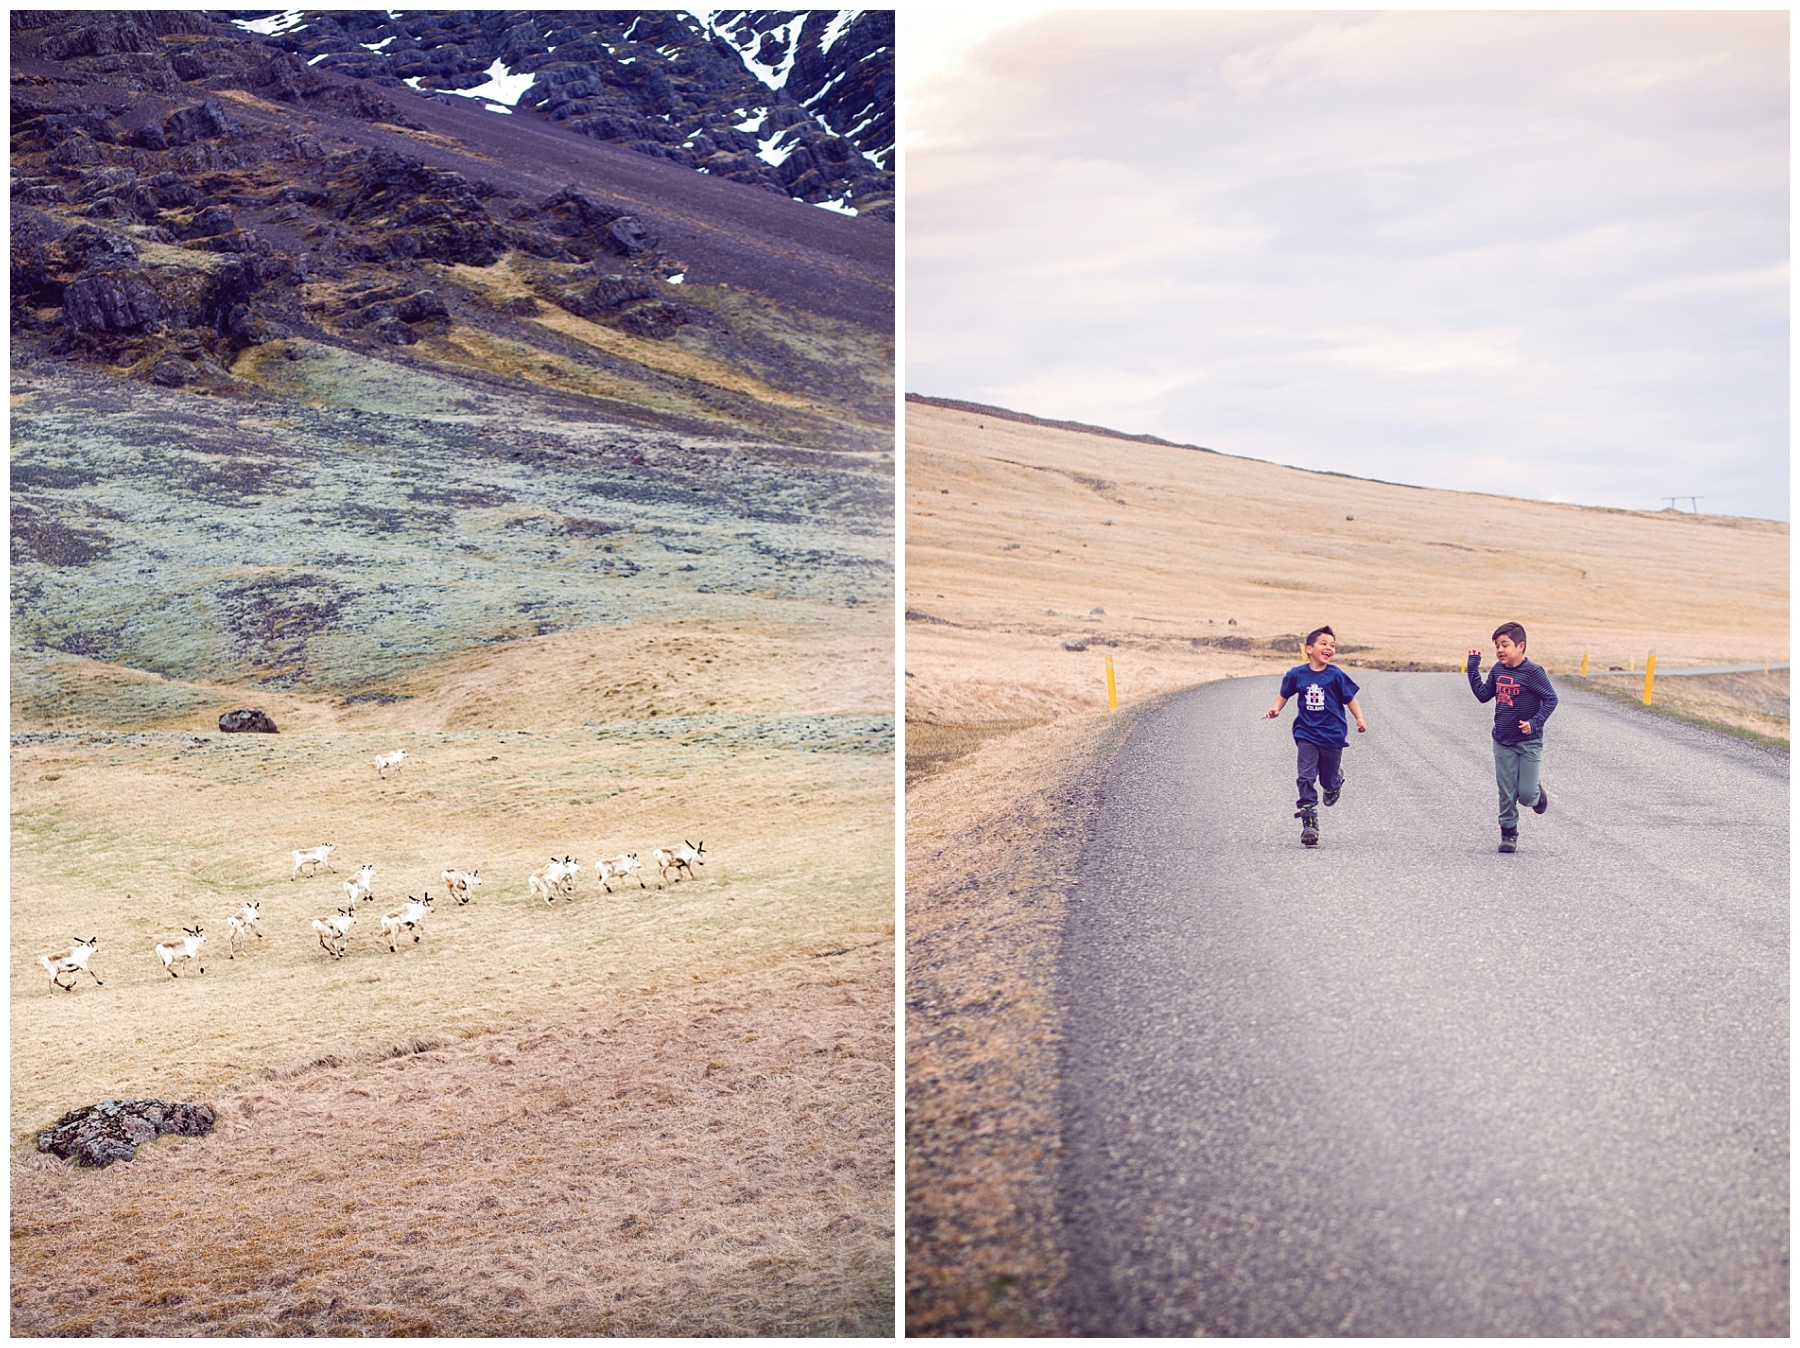 Running with wild reindeer in Iceland might just make you glad to be alive.